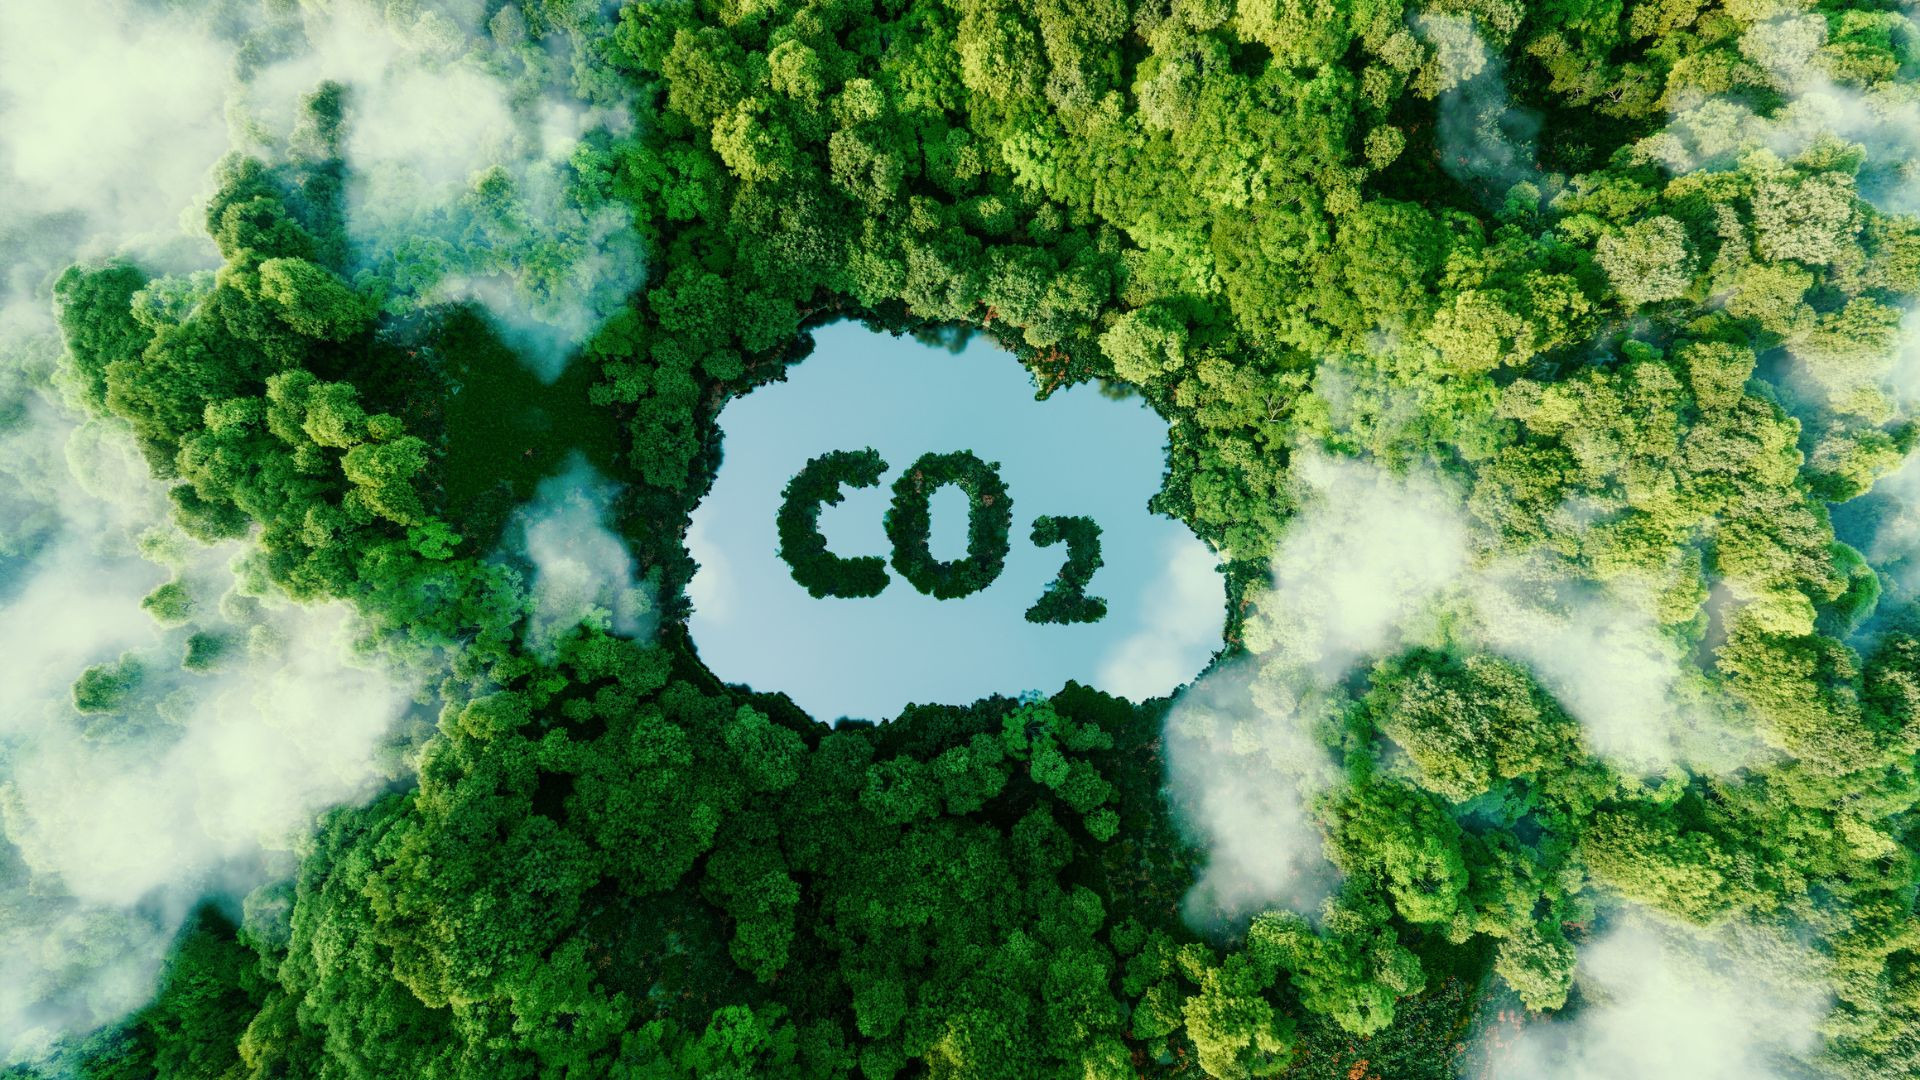 New Tech Turns CO2 Into Chemicals With 93% Efficiency, Runs Record 5000 Hrs